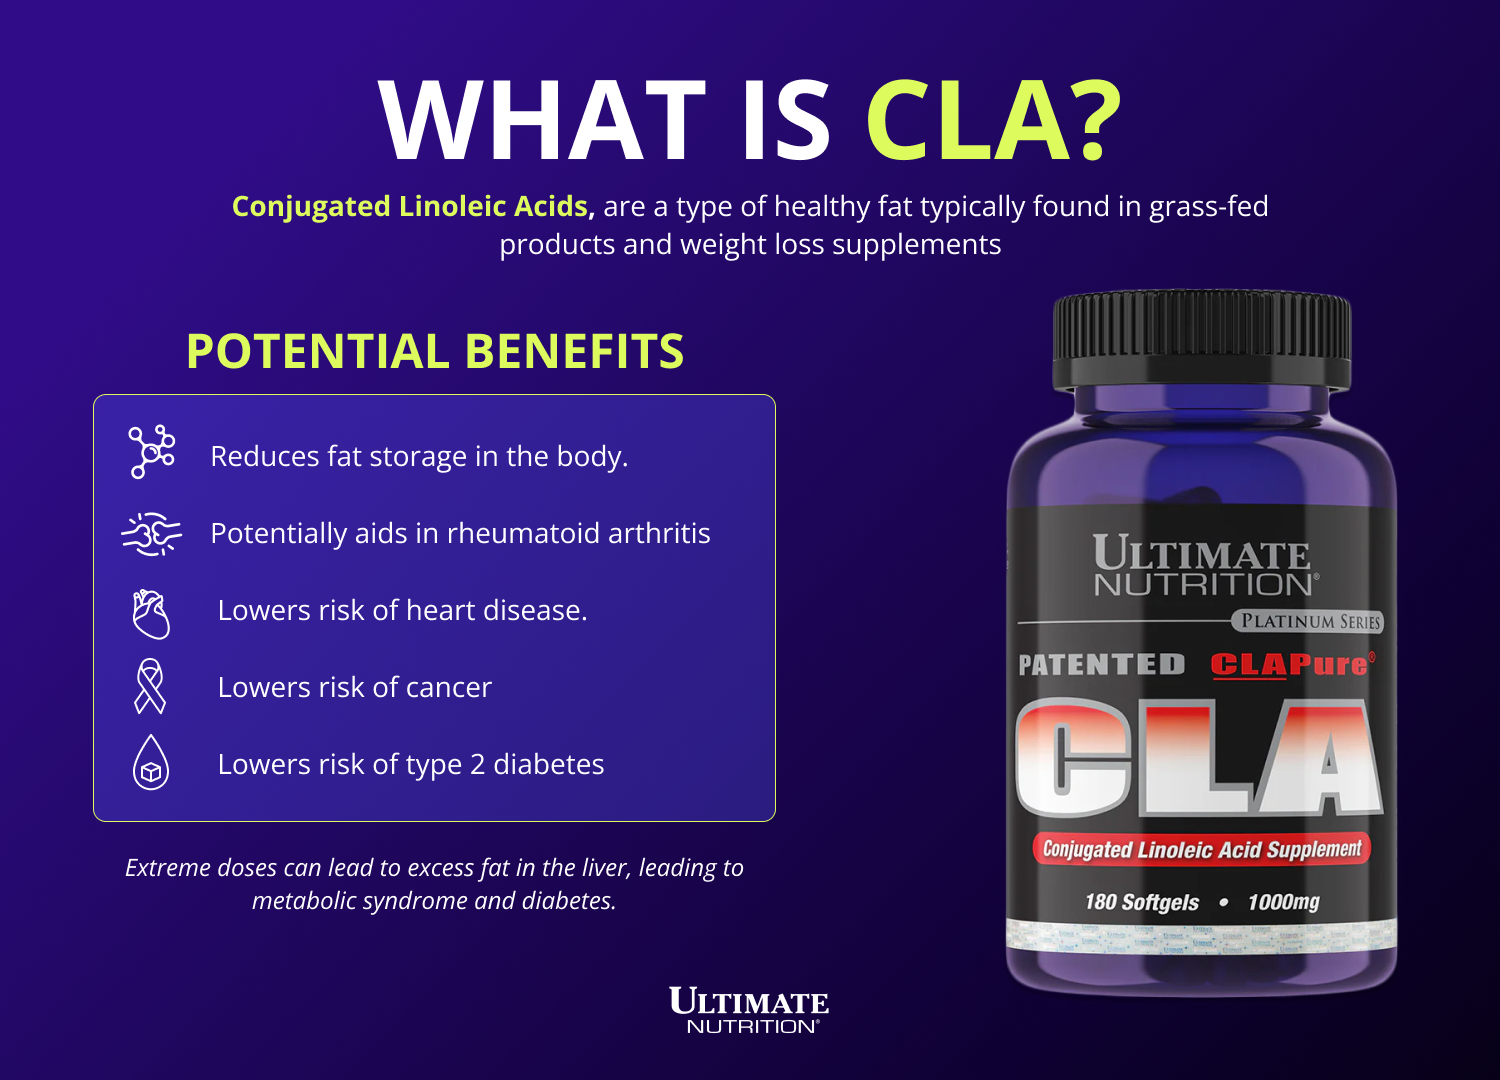 What is CLA?